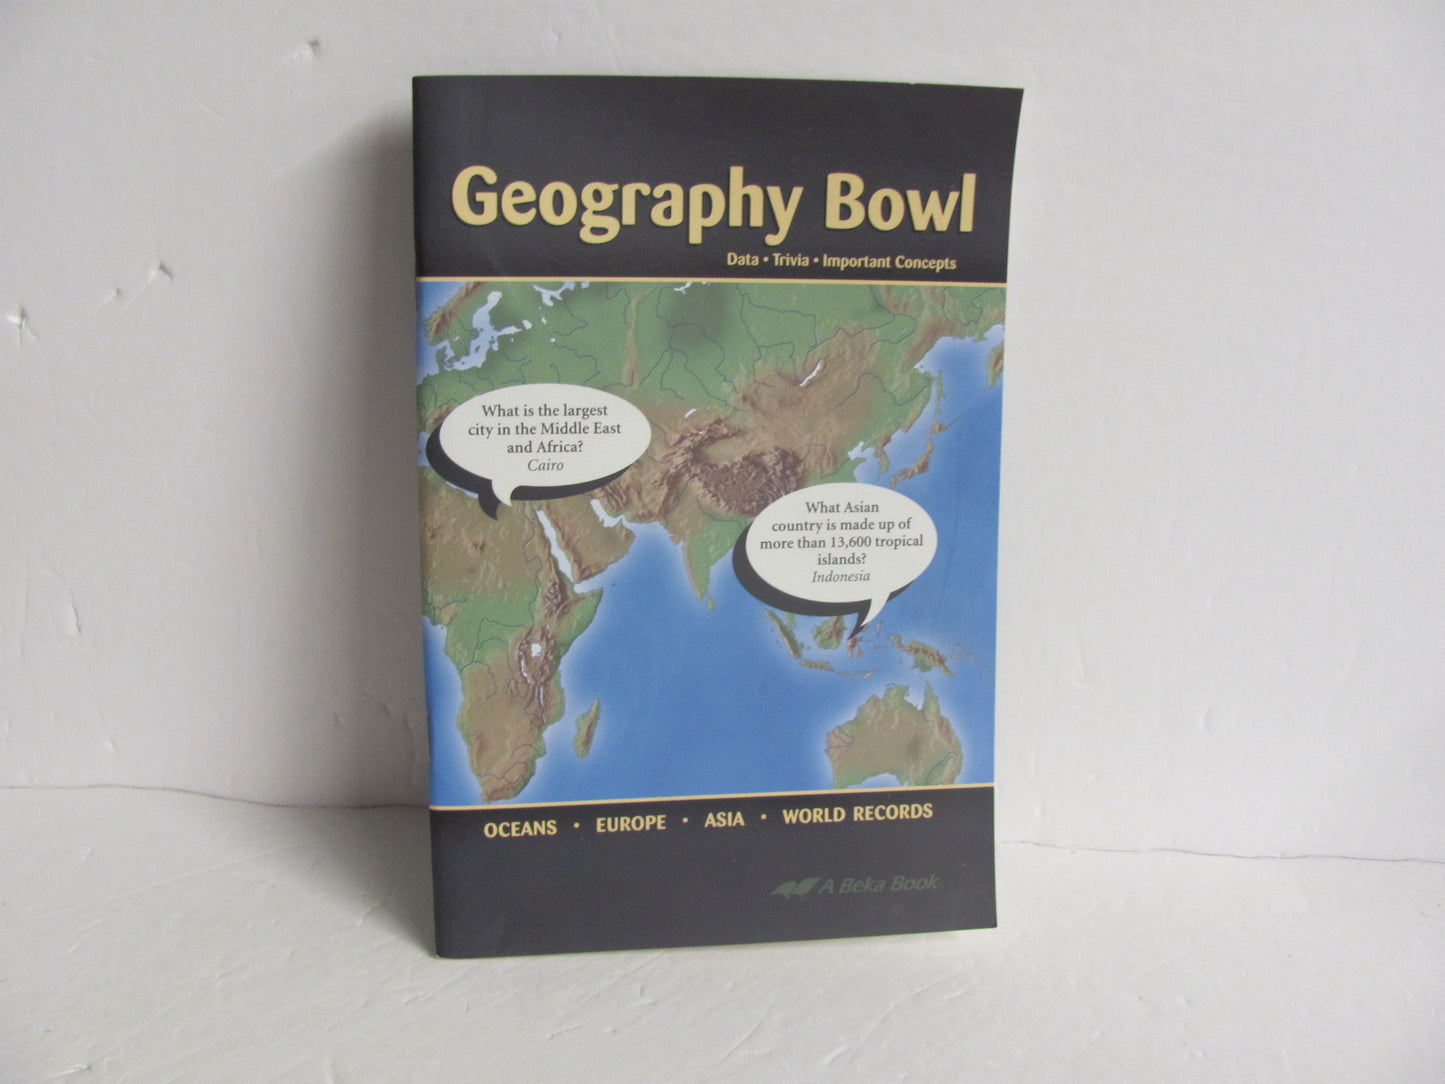 Geography Bowl Abeka Student Book Pre-Owned 6th Grade History Textbooks